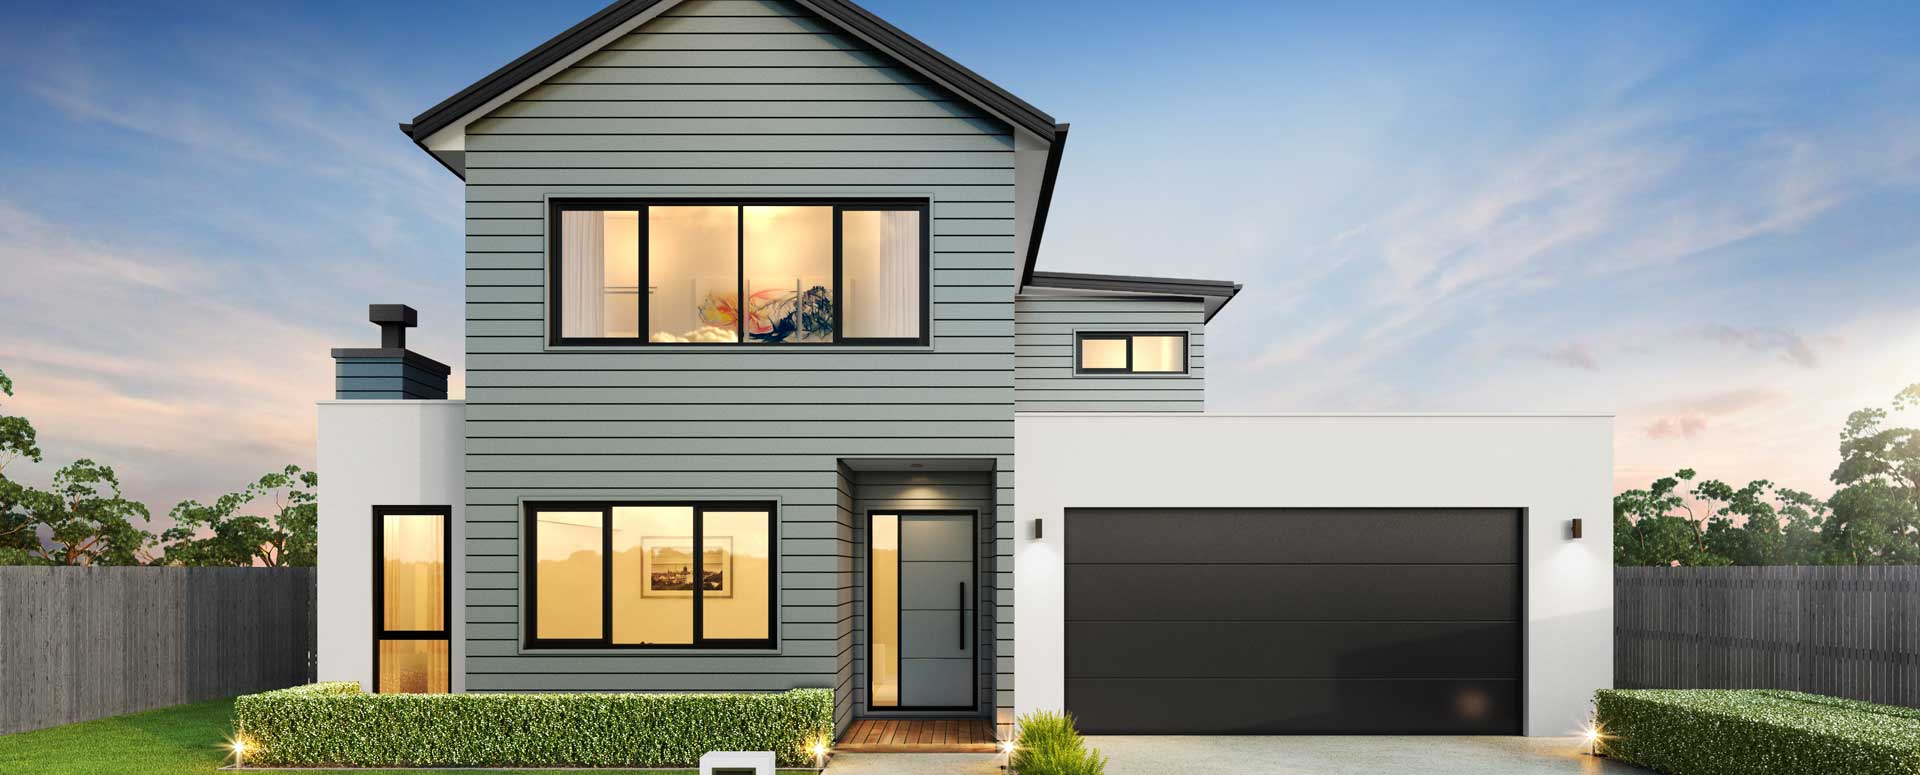 Hillview Penny Homes Banner Image